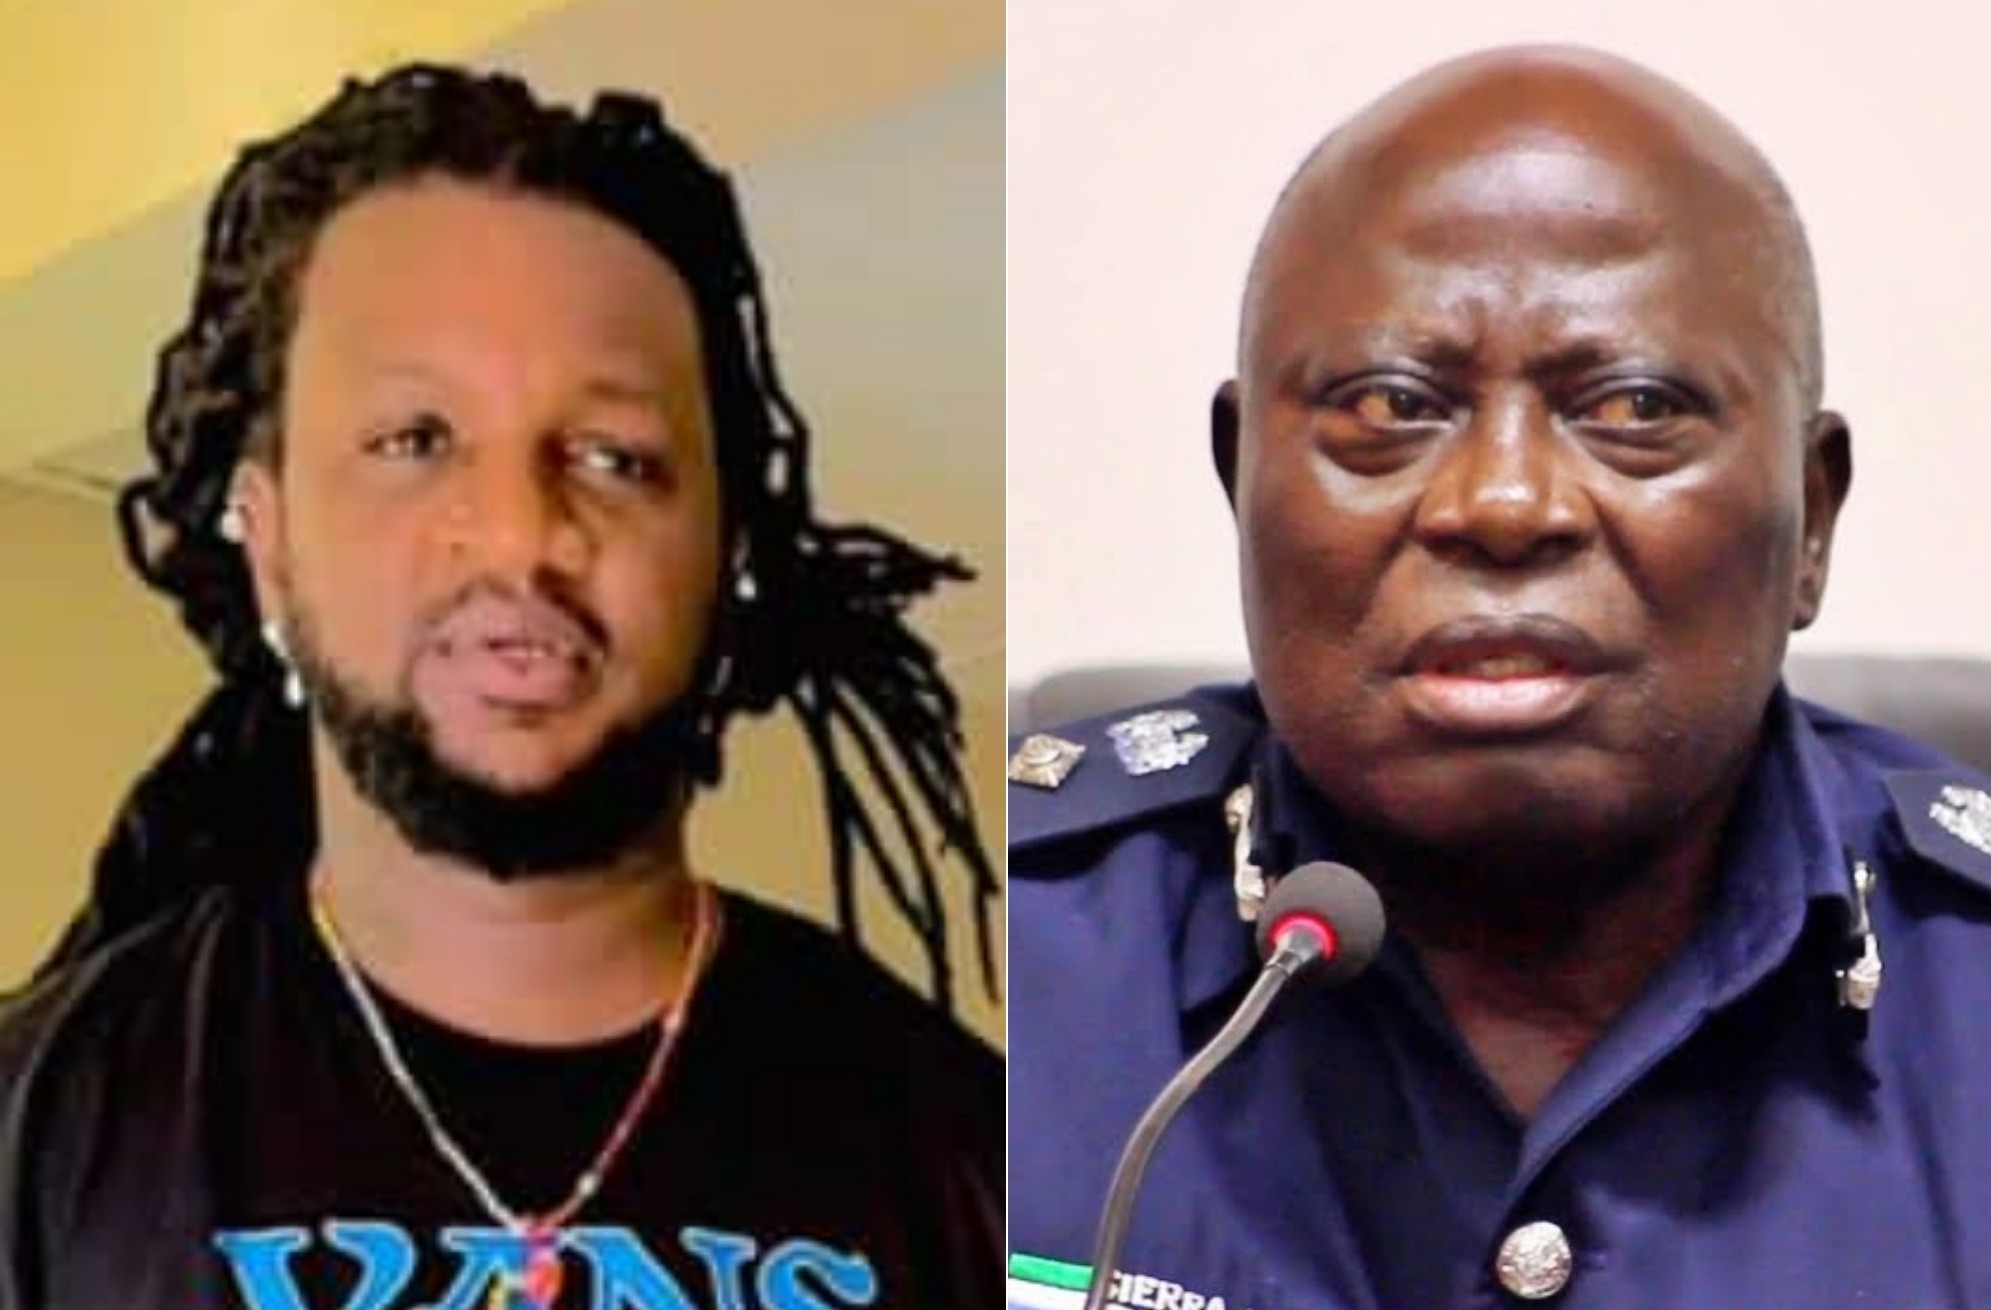 Rapper Boss LAJ has allegedly being injected and his hair cut off in cell  by the Police, according to his brother - Vertex Media